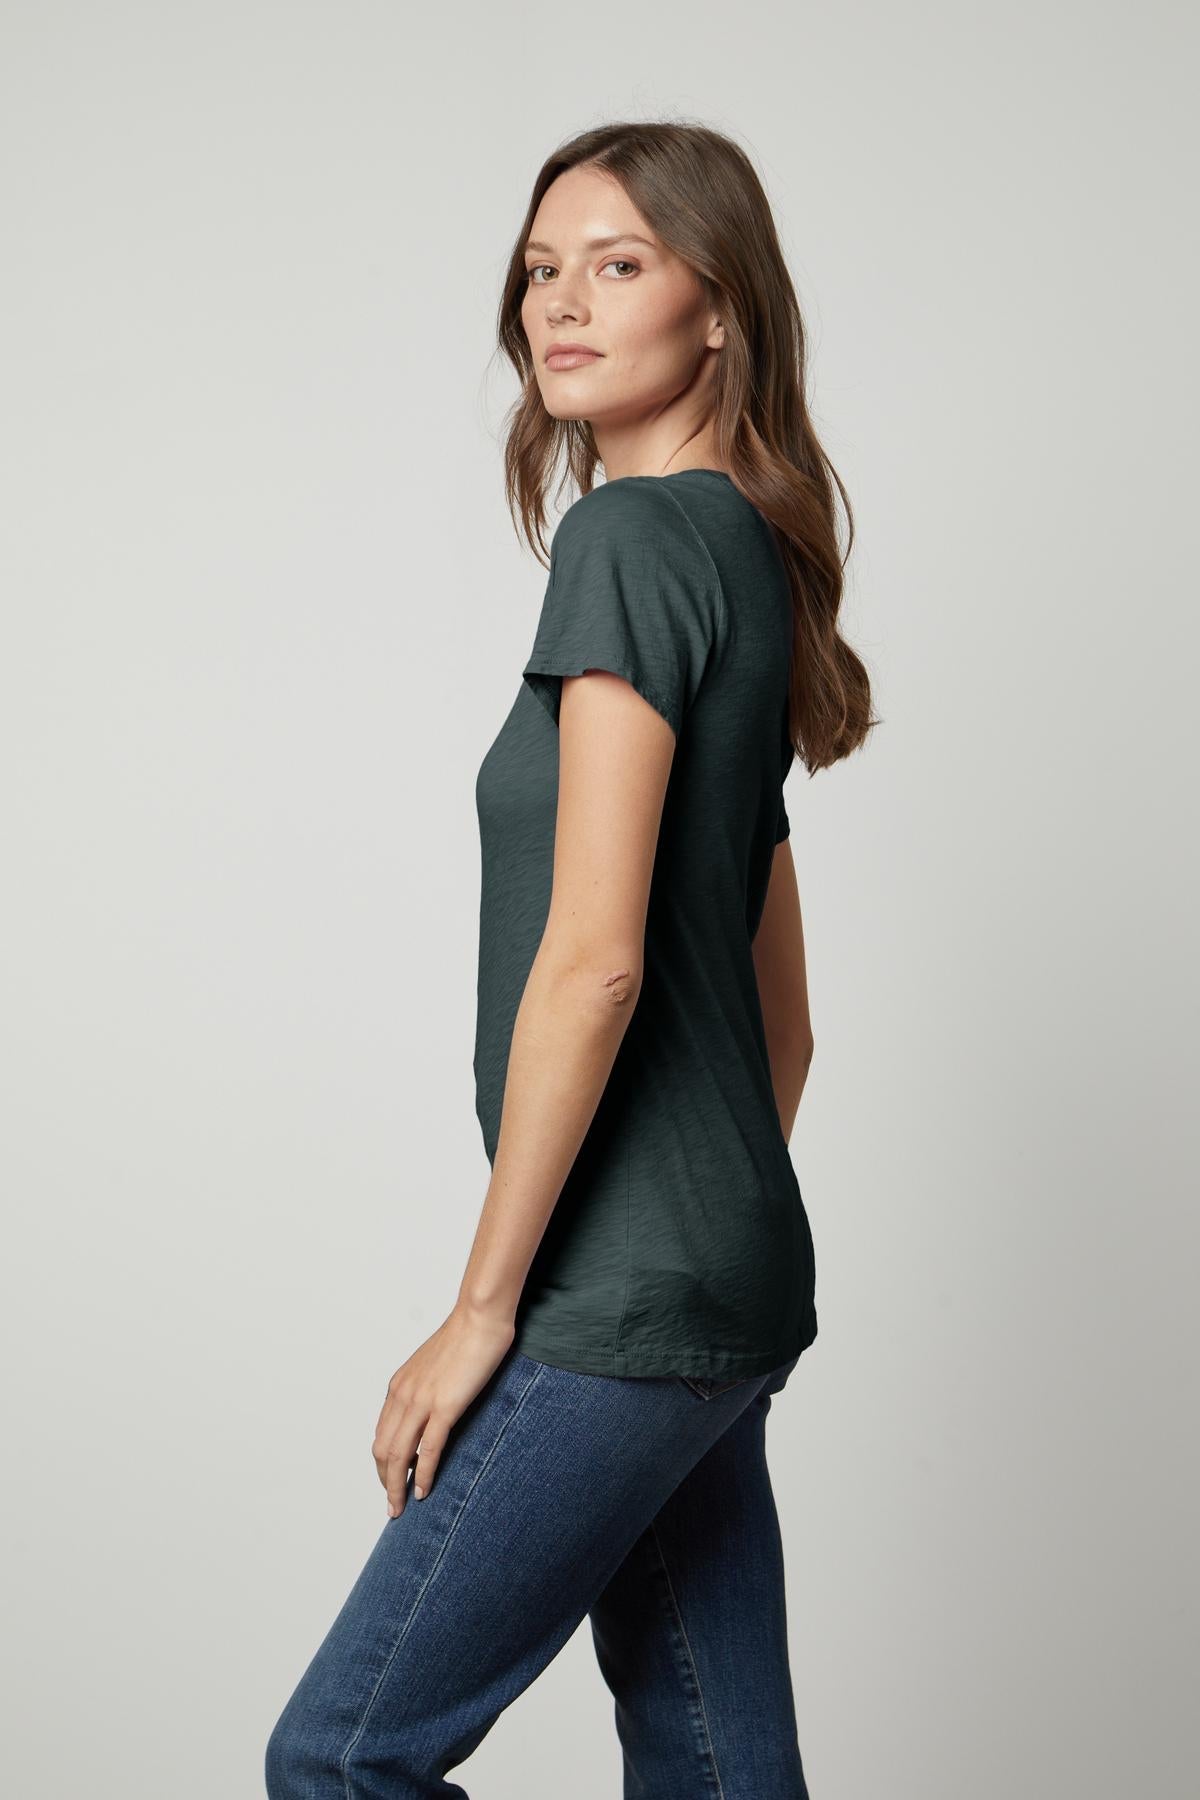   A woman rocking a tomboy style in a dark green Velvet by Graham & Spencer LILITH COTTON SLUB V-NECK TEE and jeans. 